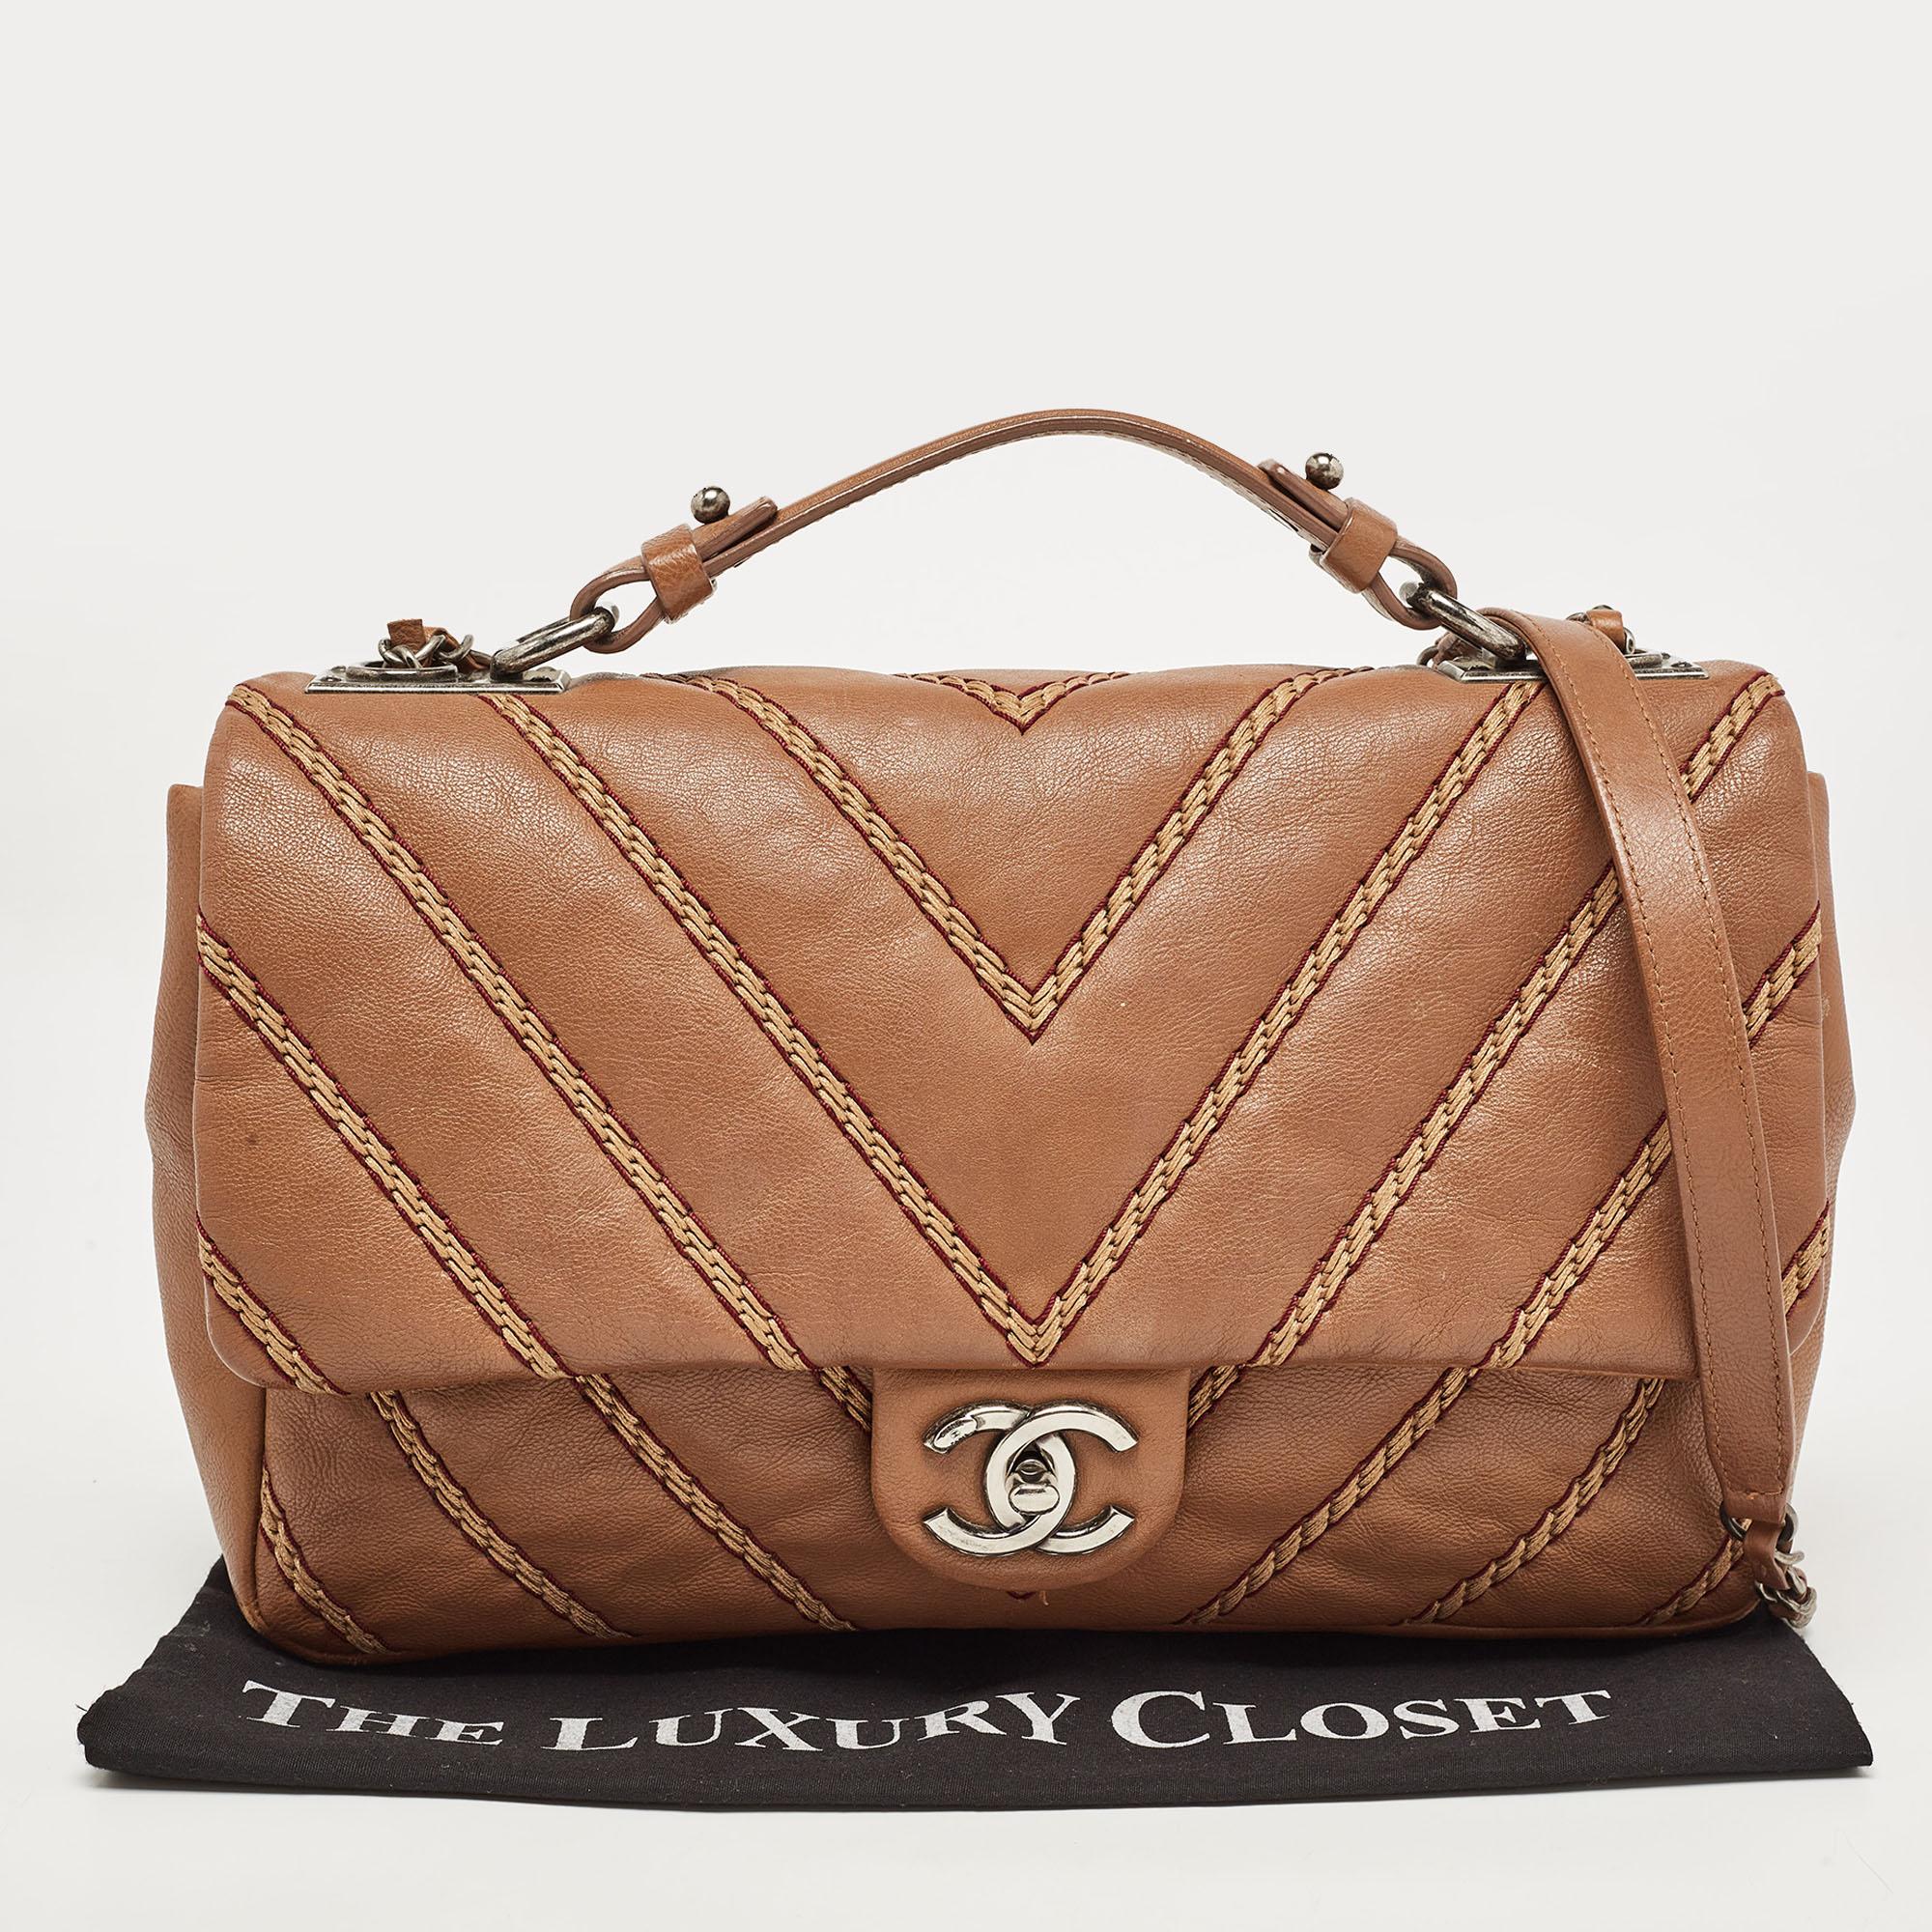 Chanel Brown Chevron Stitched Leather Classic Top Handle Bag For Sale 6